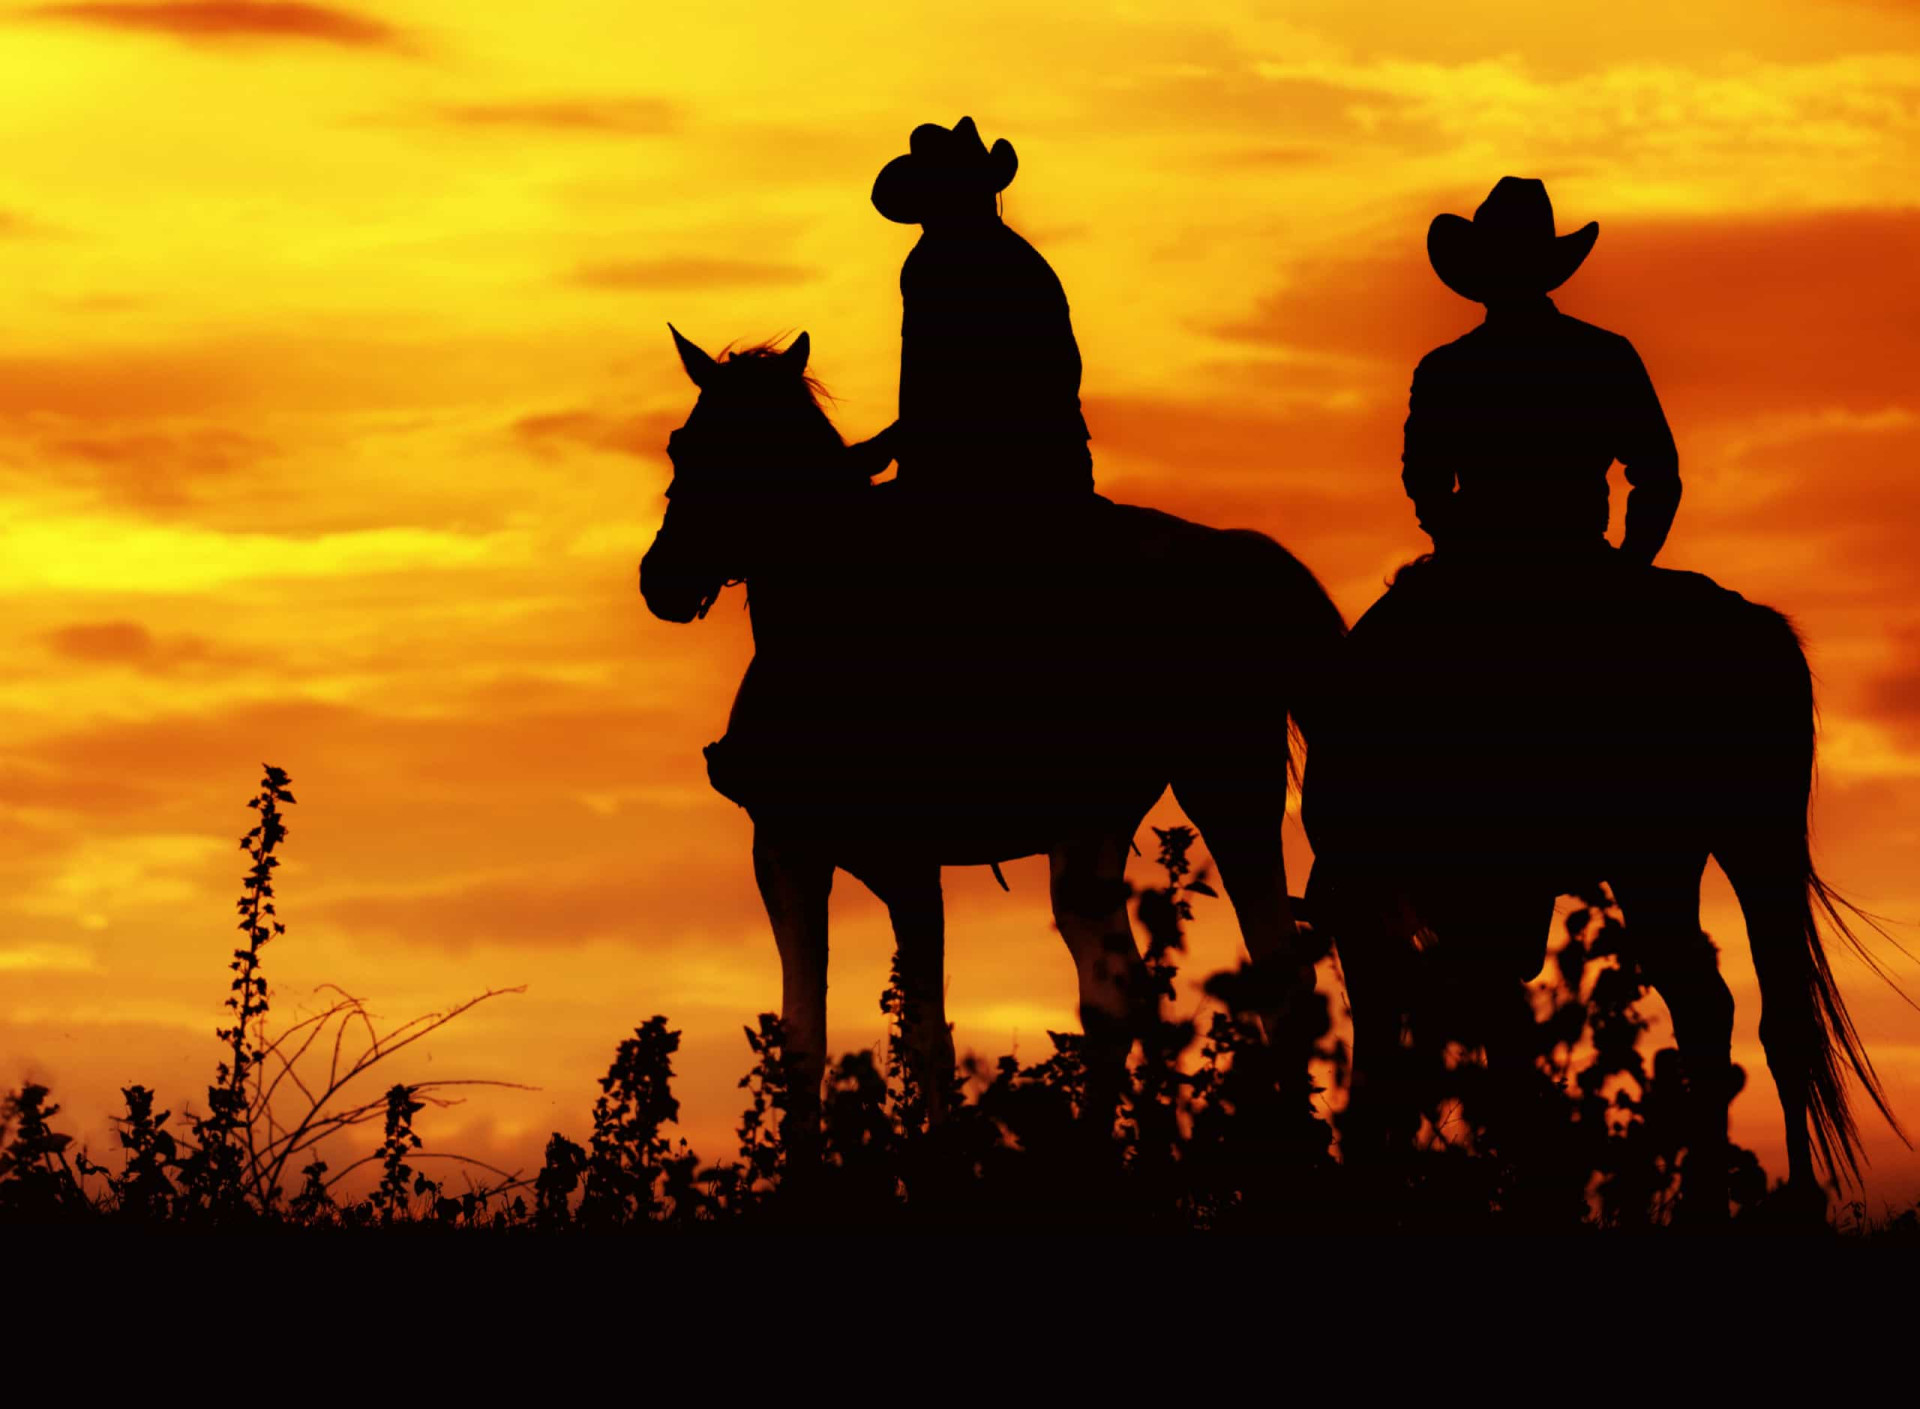 <p>Saddle up and hit the trail! Professional ranchers, or animal wranglers, are experts at rounding up errant livestock. Besides ranch work, a skilled horseman is often required to transport and oversee animals for television and film studios. The Old West is as alluring as ever, it seems.</p><p><a href="https://www.msn.com/en-us/community/channel/vid-7xx8mnucu55yw63we9va2gwr7uihbxwc68fxqp25x6tg4ftibpra?cvid=94631541bc0f4f89bfd59158d696ad7e">Follow us and access great exclusive content every day</a></p>